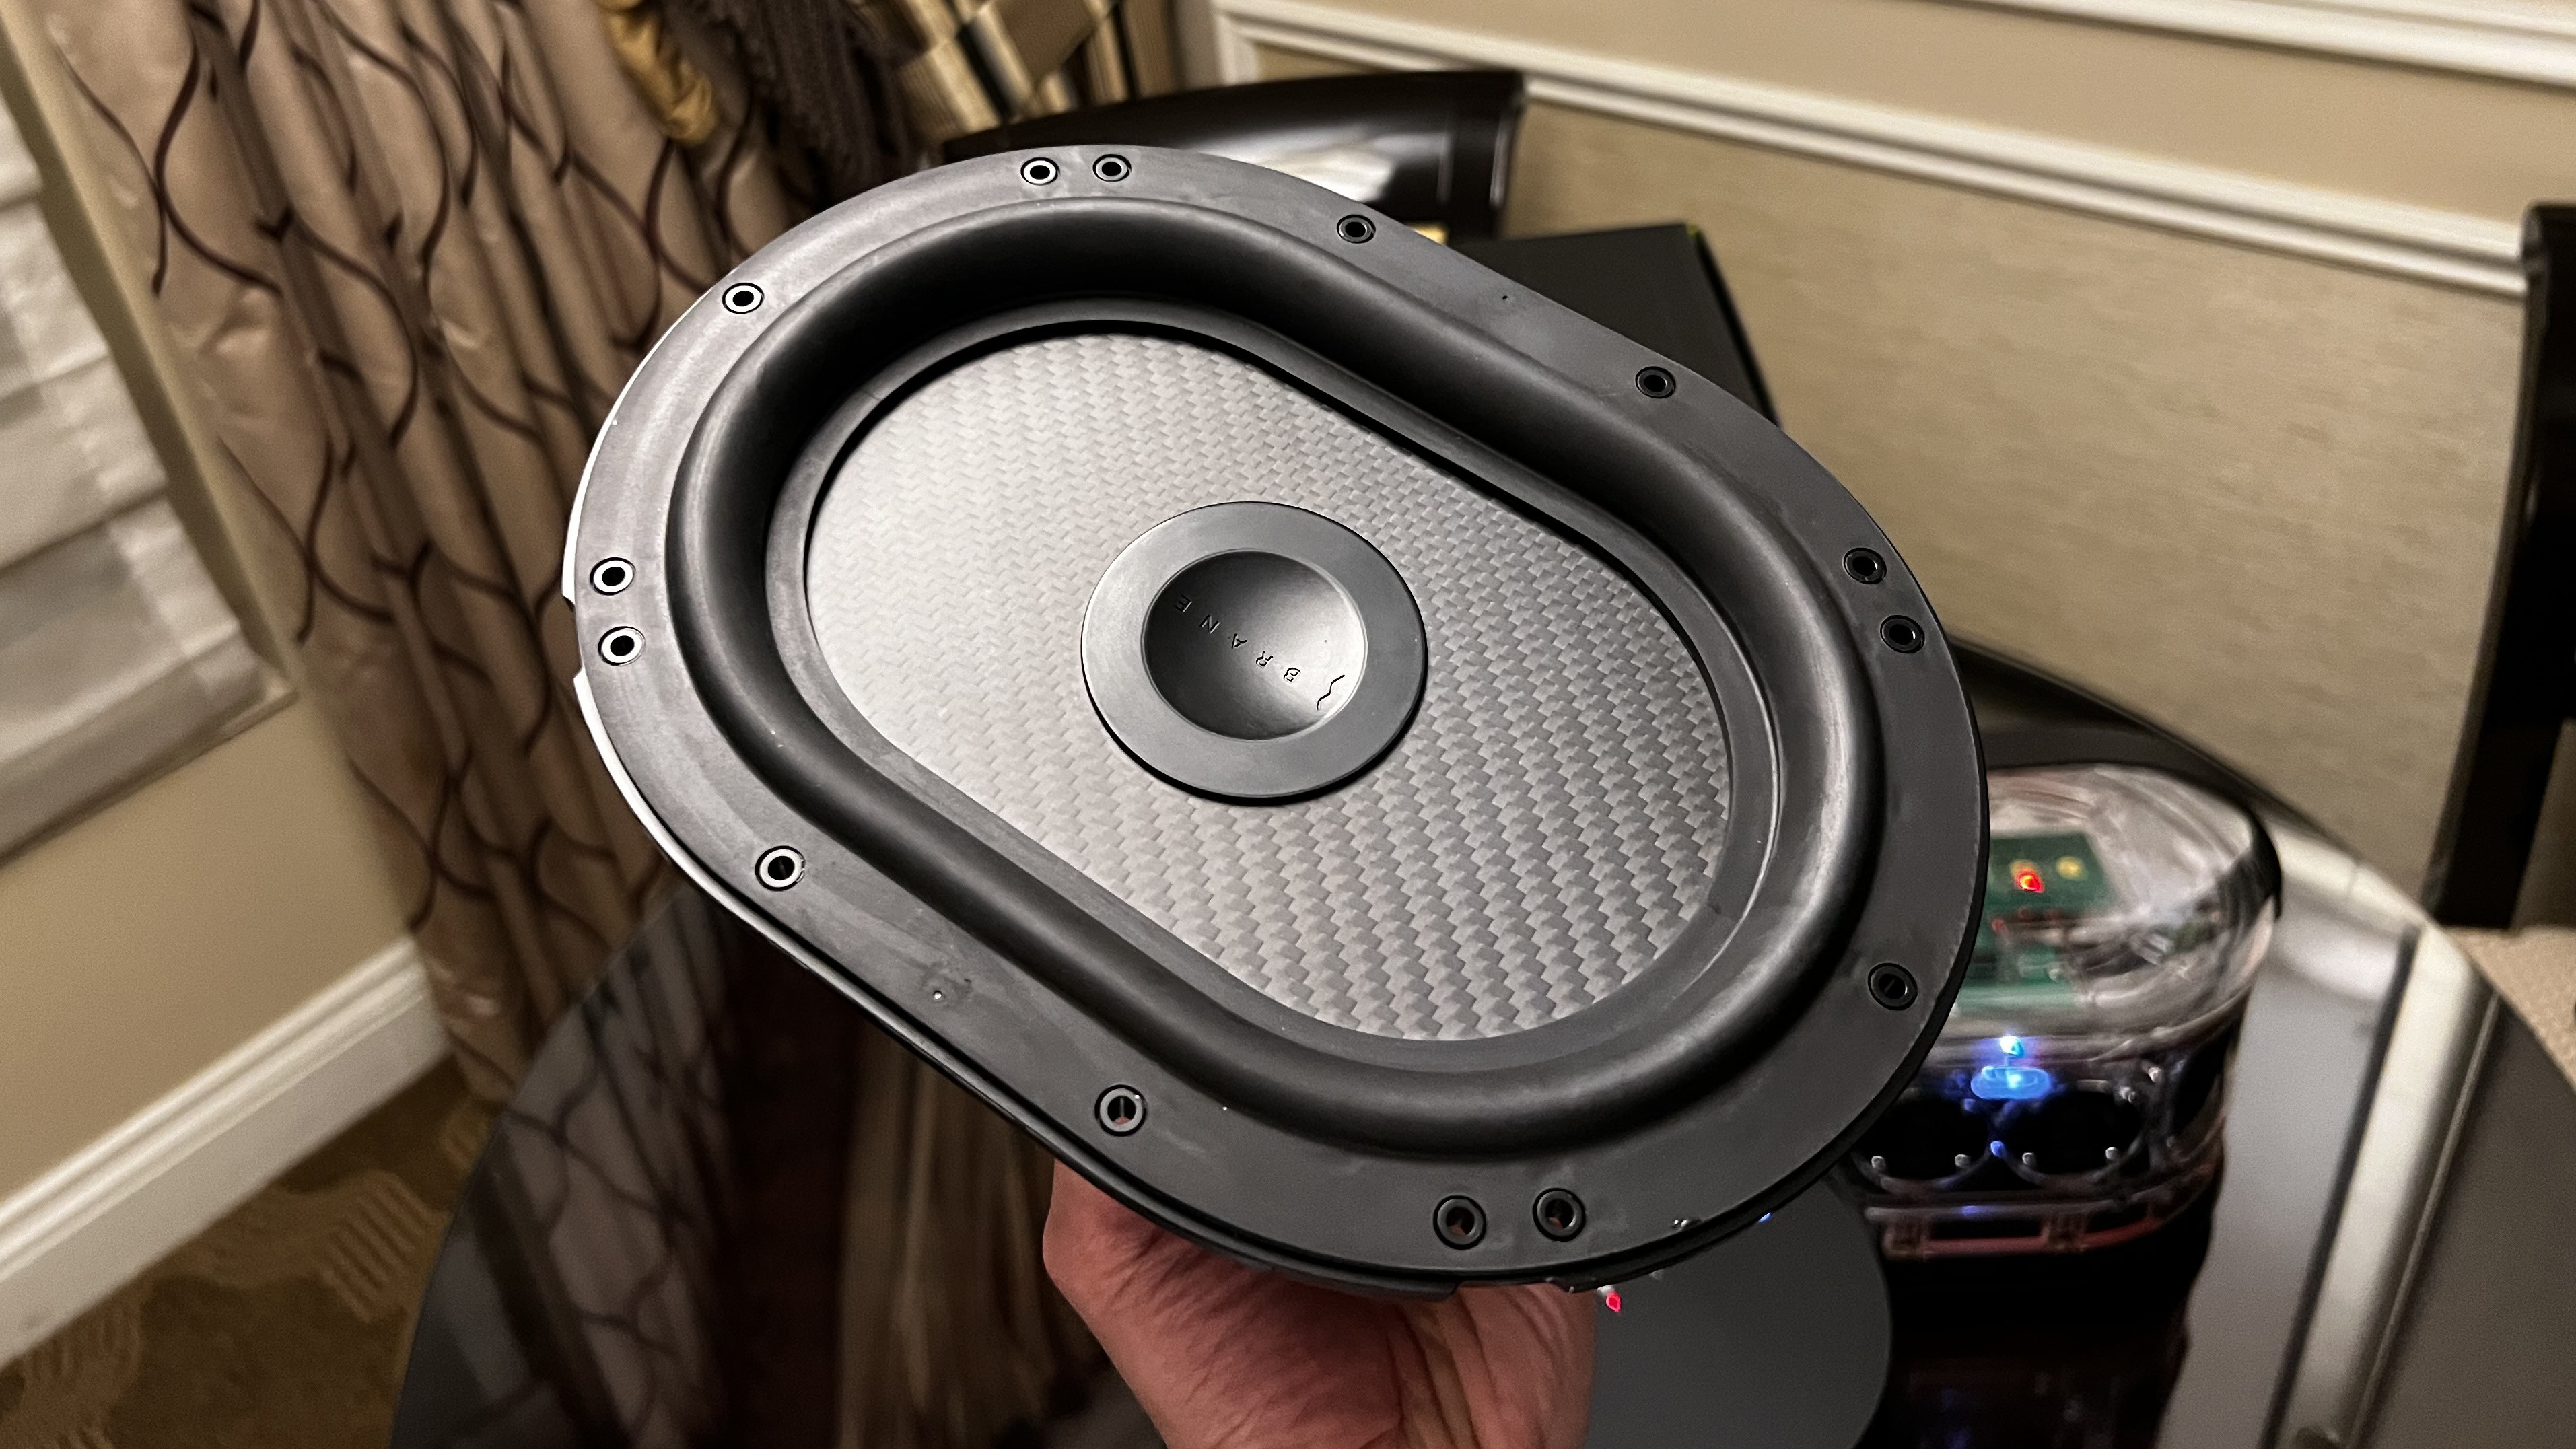 The Brane X speaker's subwoofer unit in a man's hand